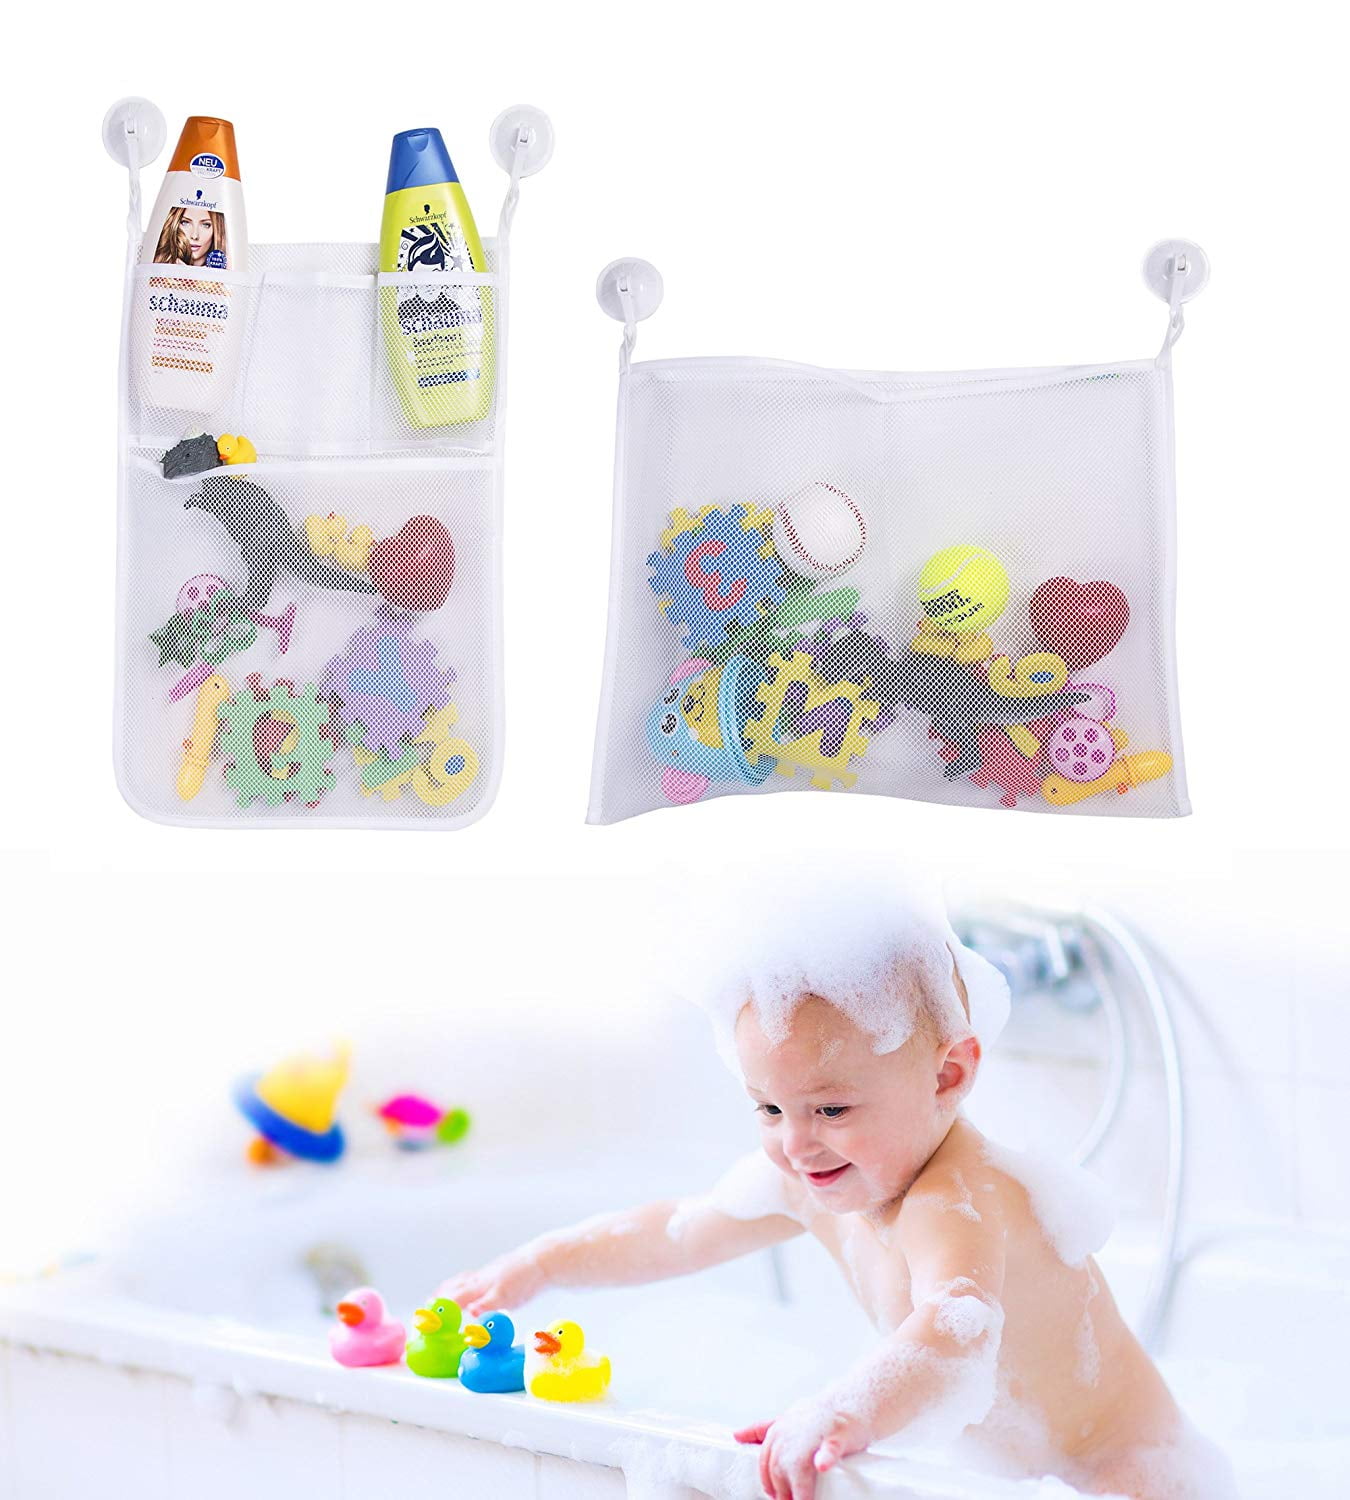 Baby Bath Shower Toy Mesh Storage Bag Organizer With Suction Cups Set of 2--NEW 